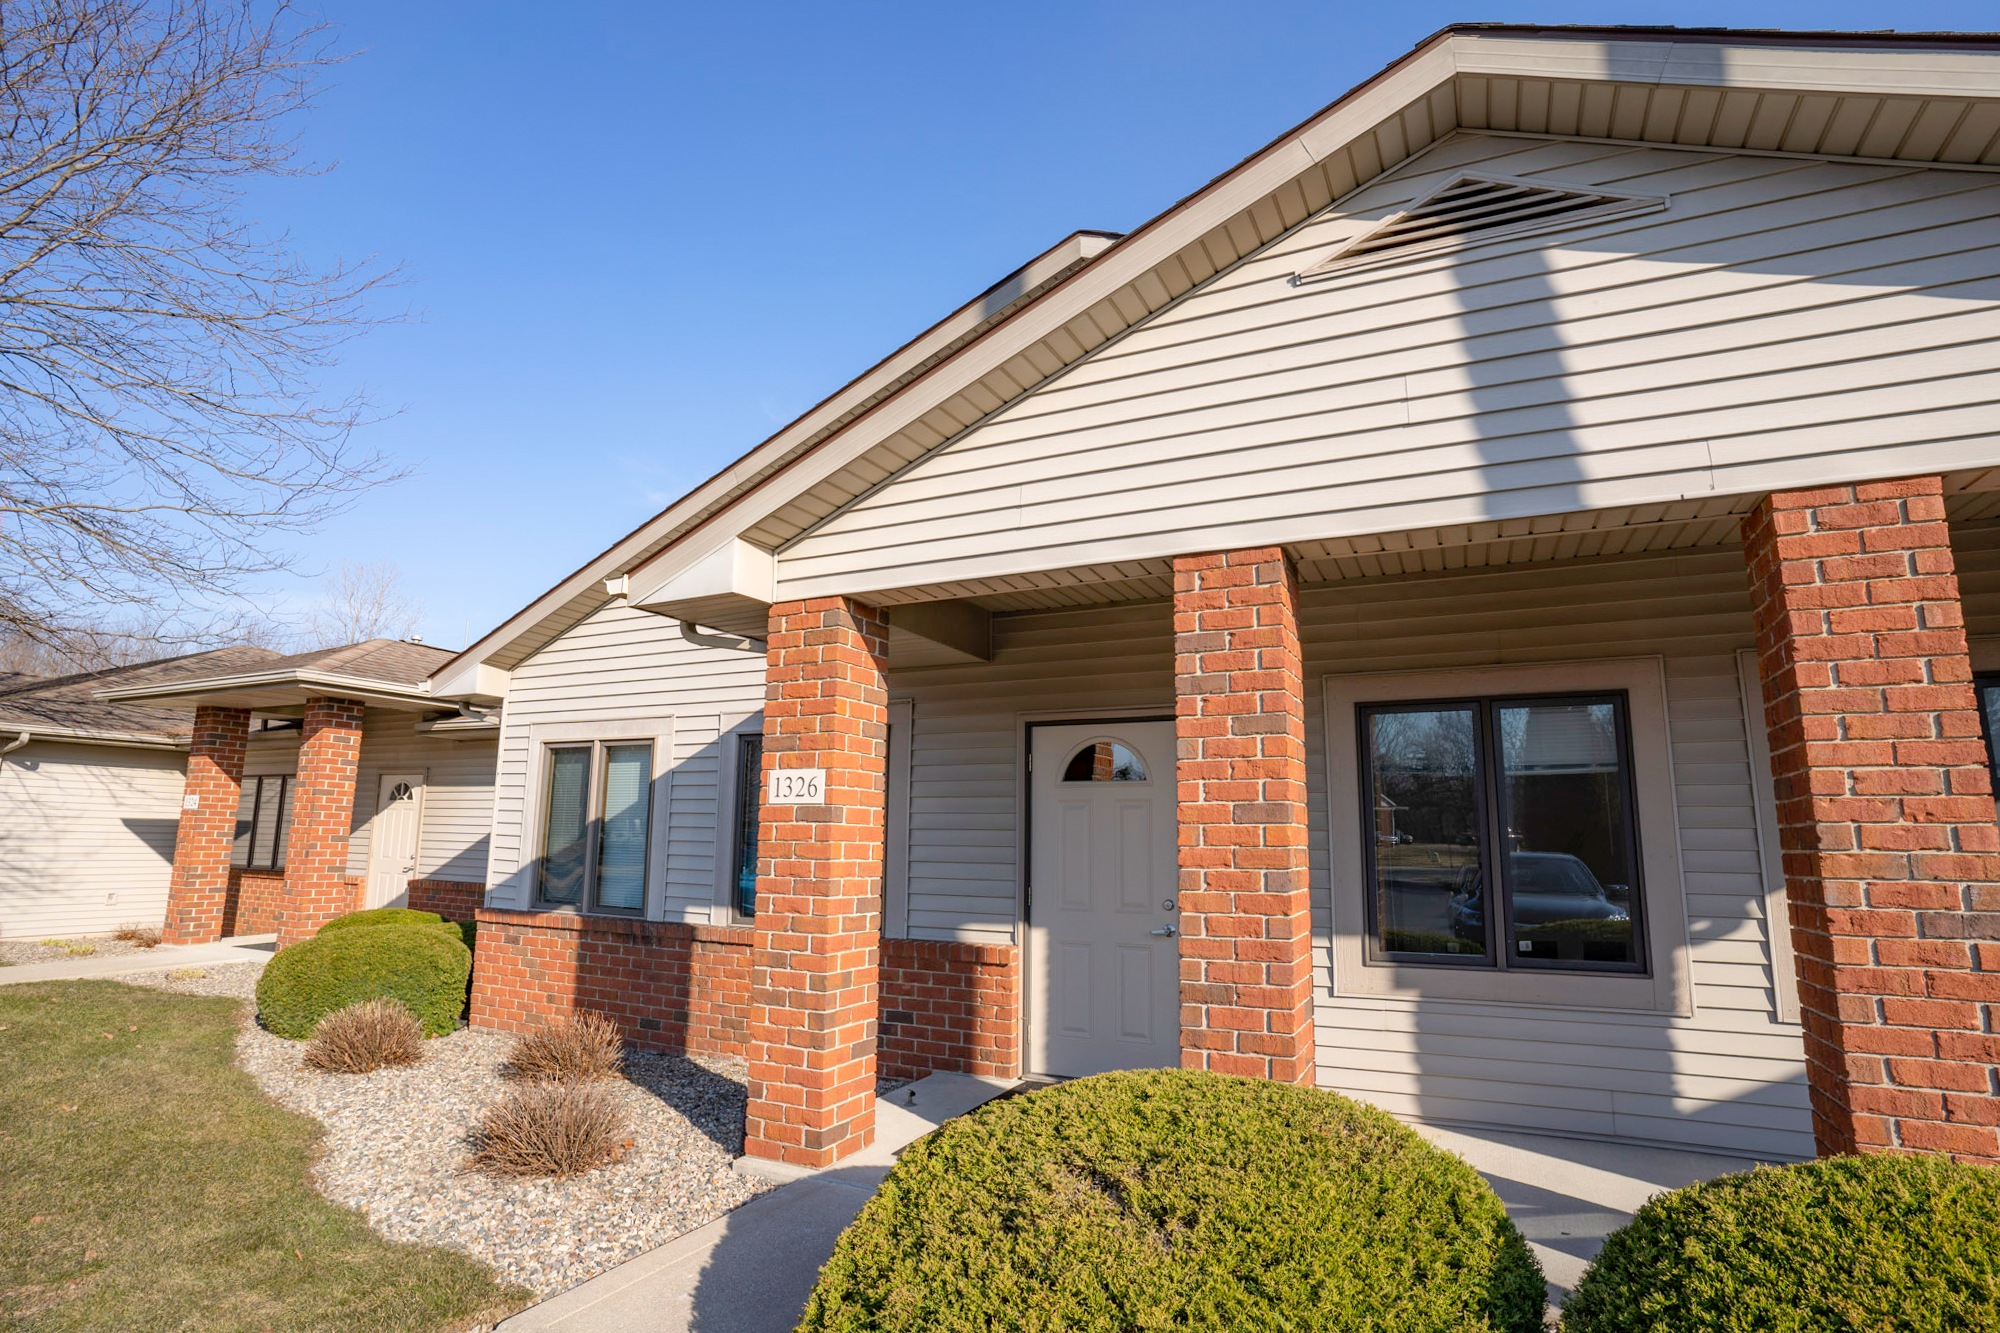 Sturges Property Group - Office space for lease in Auburn Indiana small office